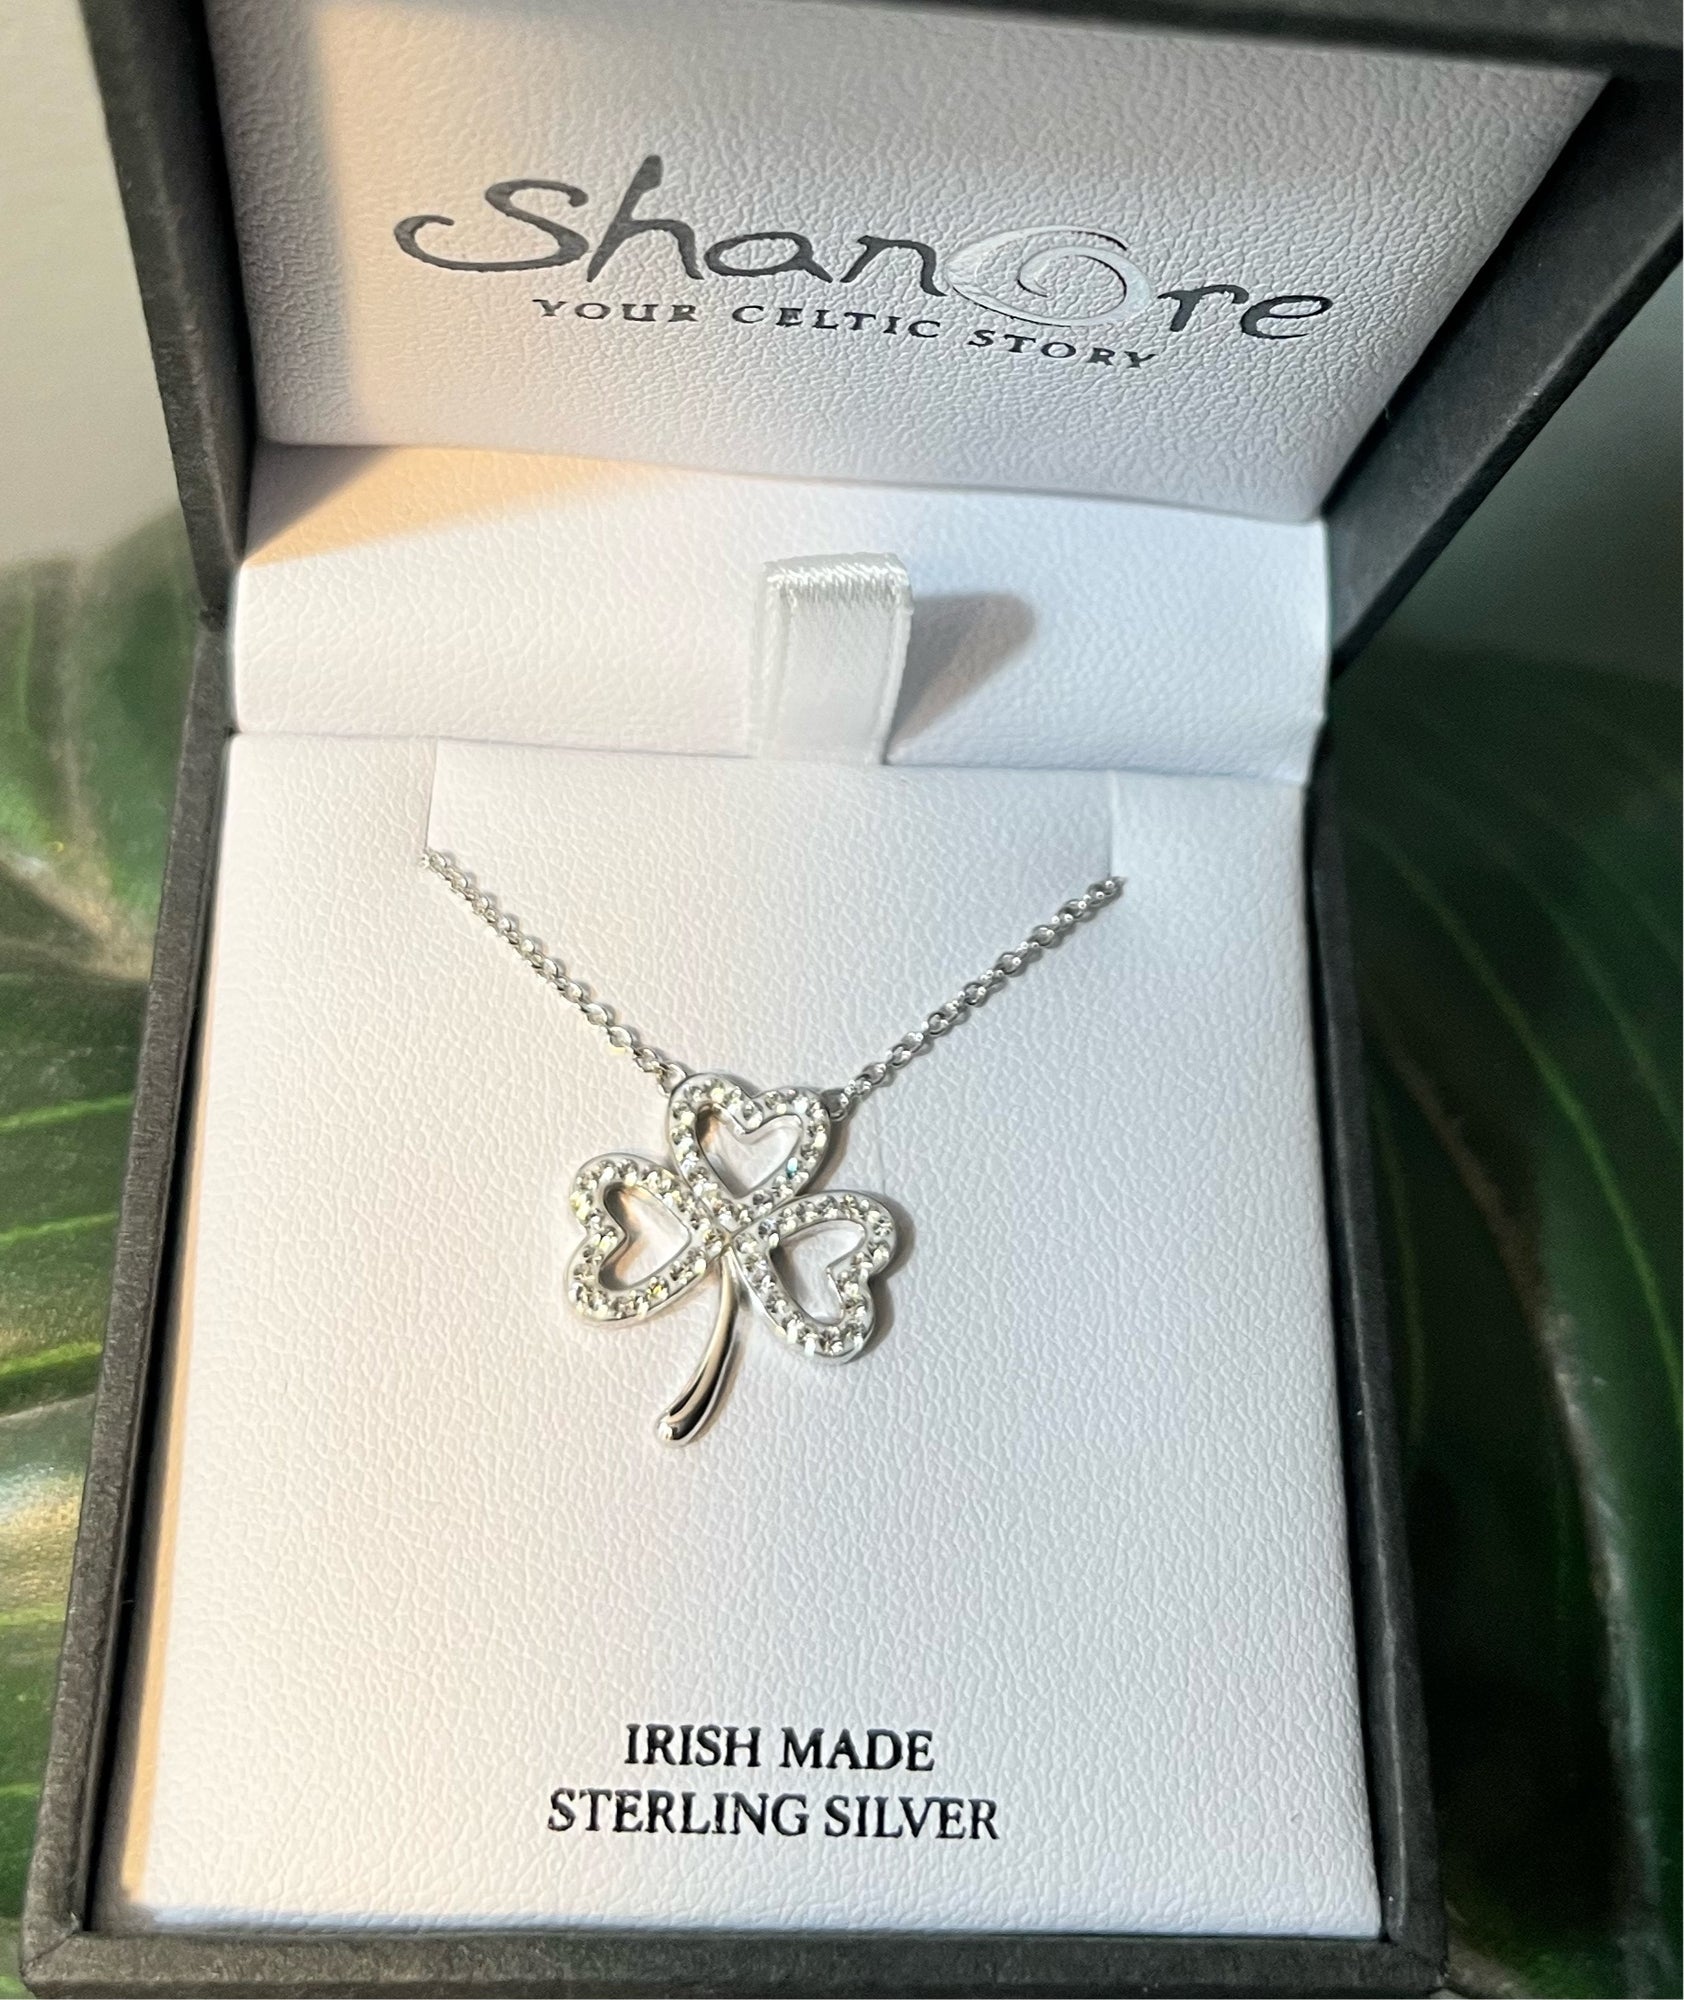 Four Leaf Clover Heart Shaped Swarovski Elements Crystal Rhodium Plated Pendant  Necklace - Green : Dahlia: Amazon.ca: Clothing, Shoes & Accessories